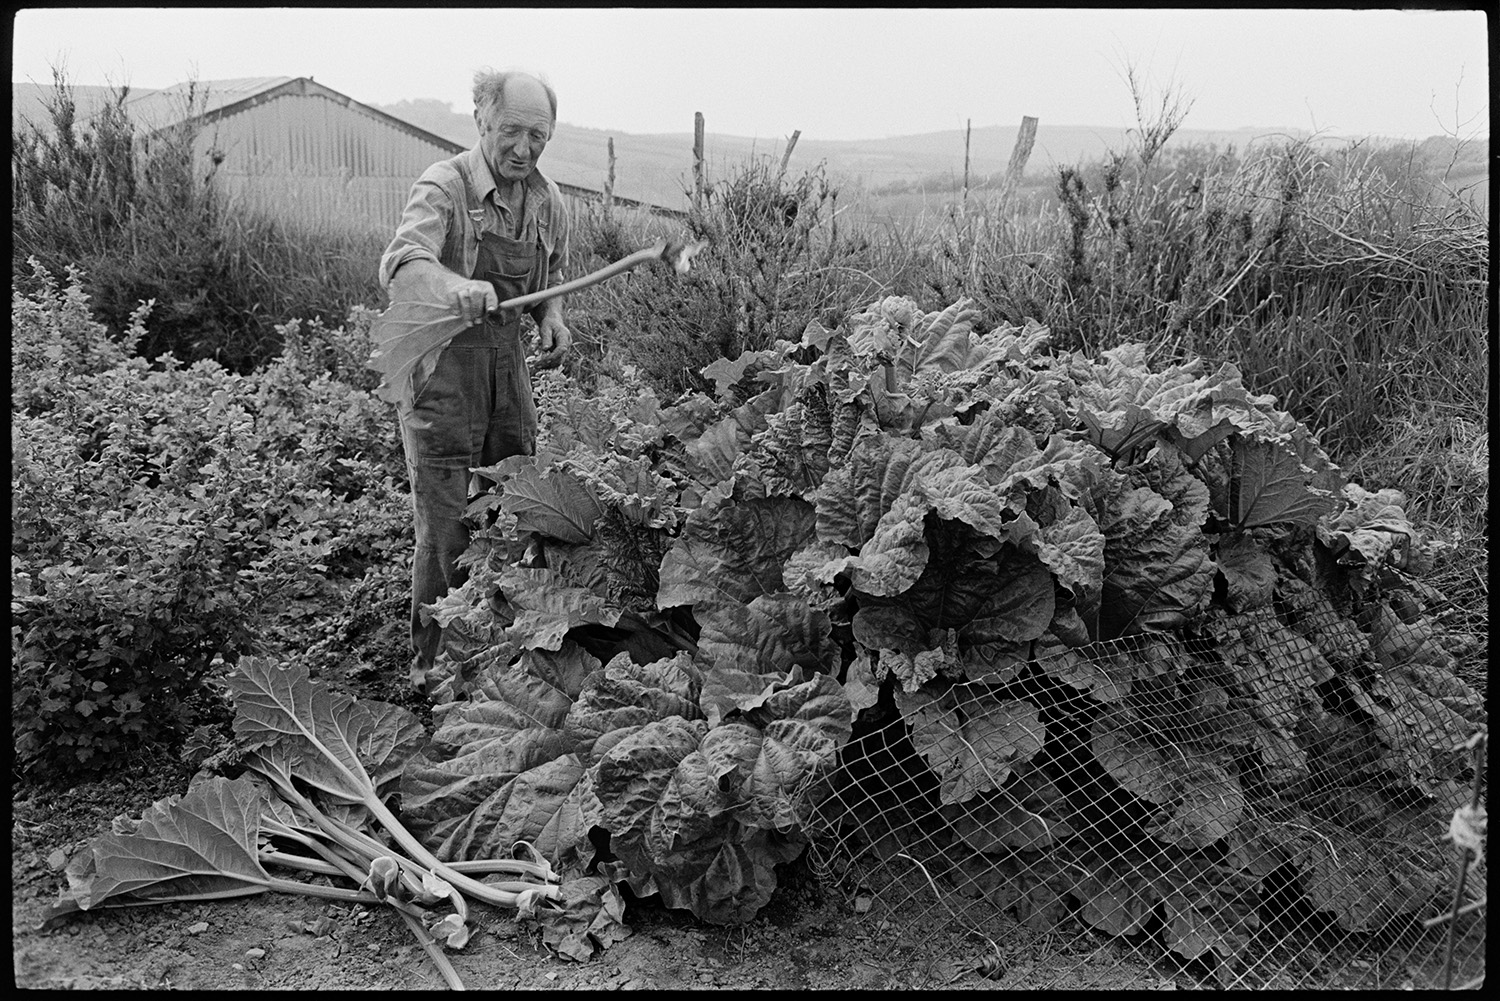 Farmer planting seedlings cutting rhubarb, standing with hoe. Wearing dungarees. 
[A man cutting rhubarb in his vegetable garden at Exmoor farm. He is wearing dungarees and was a folk singer.]